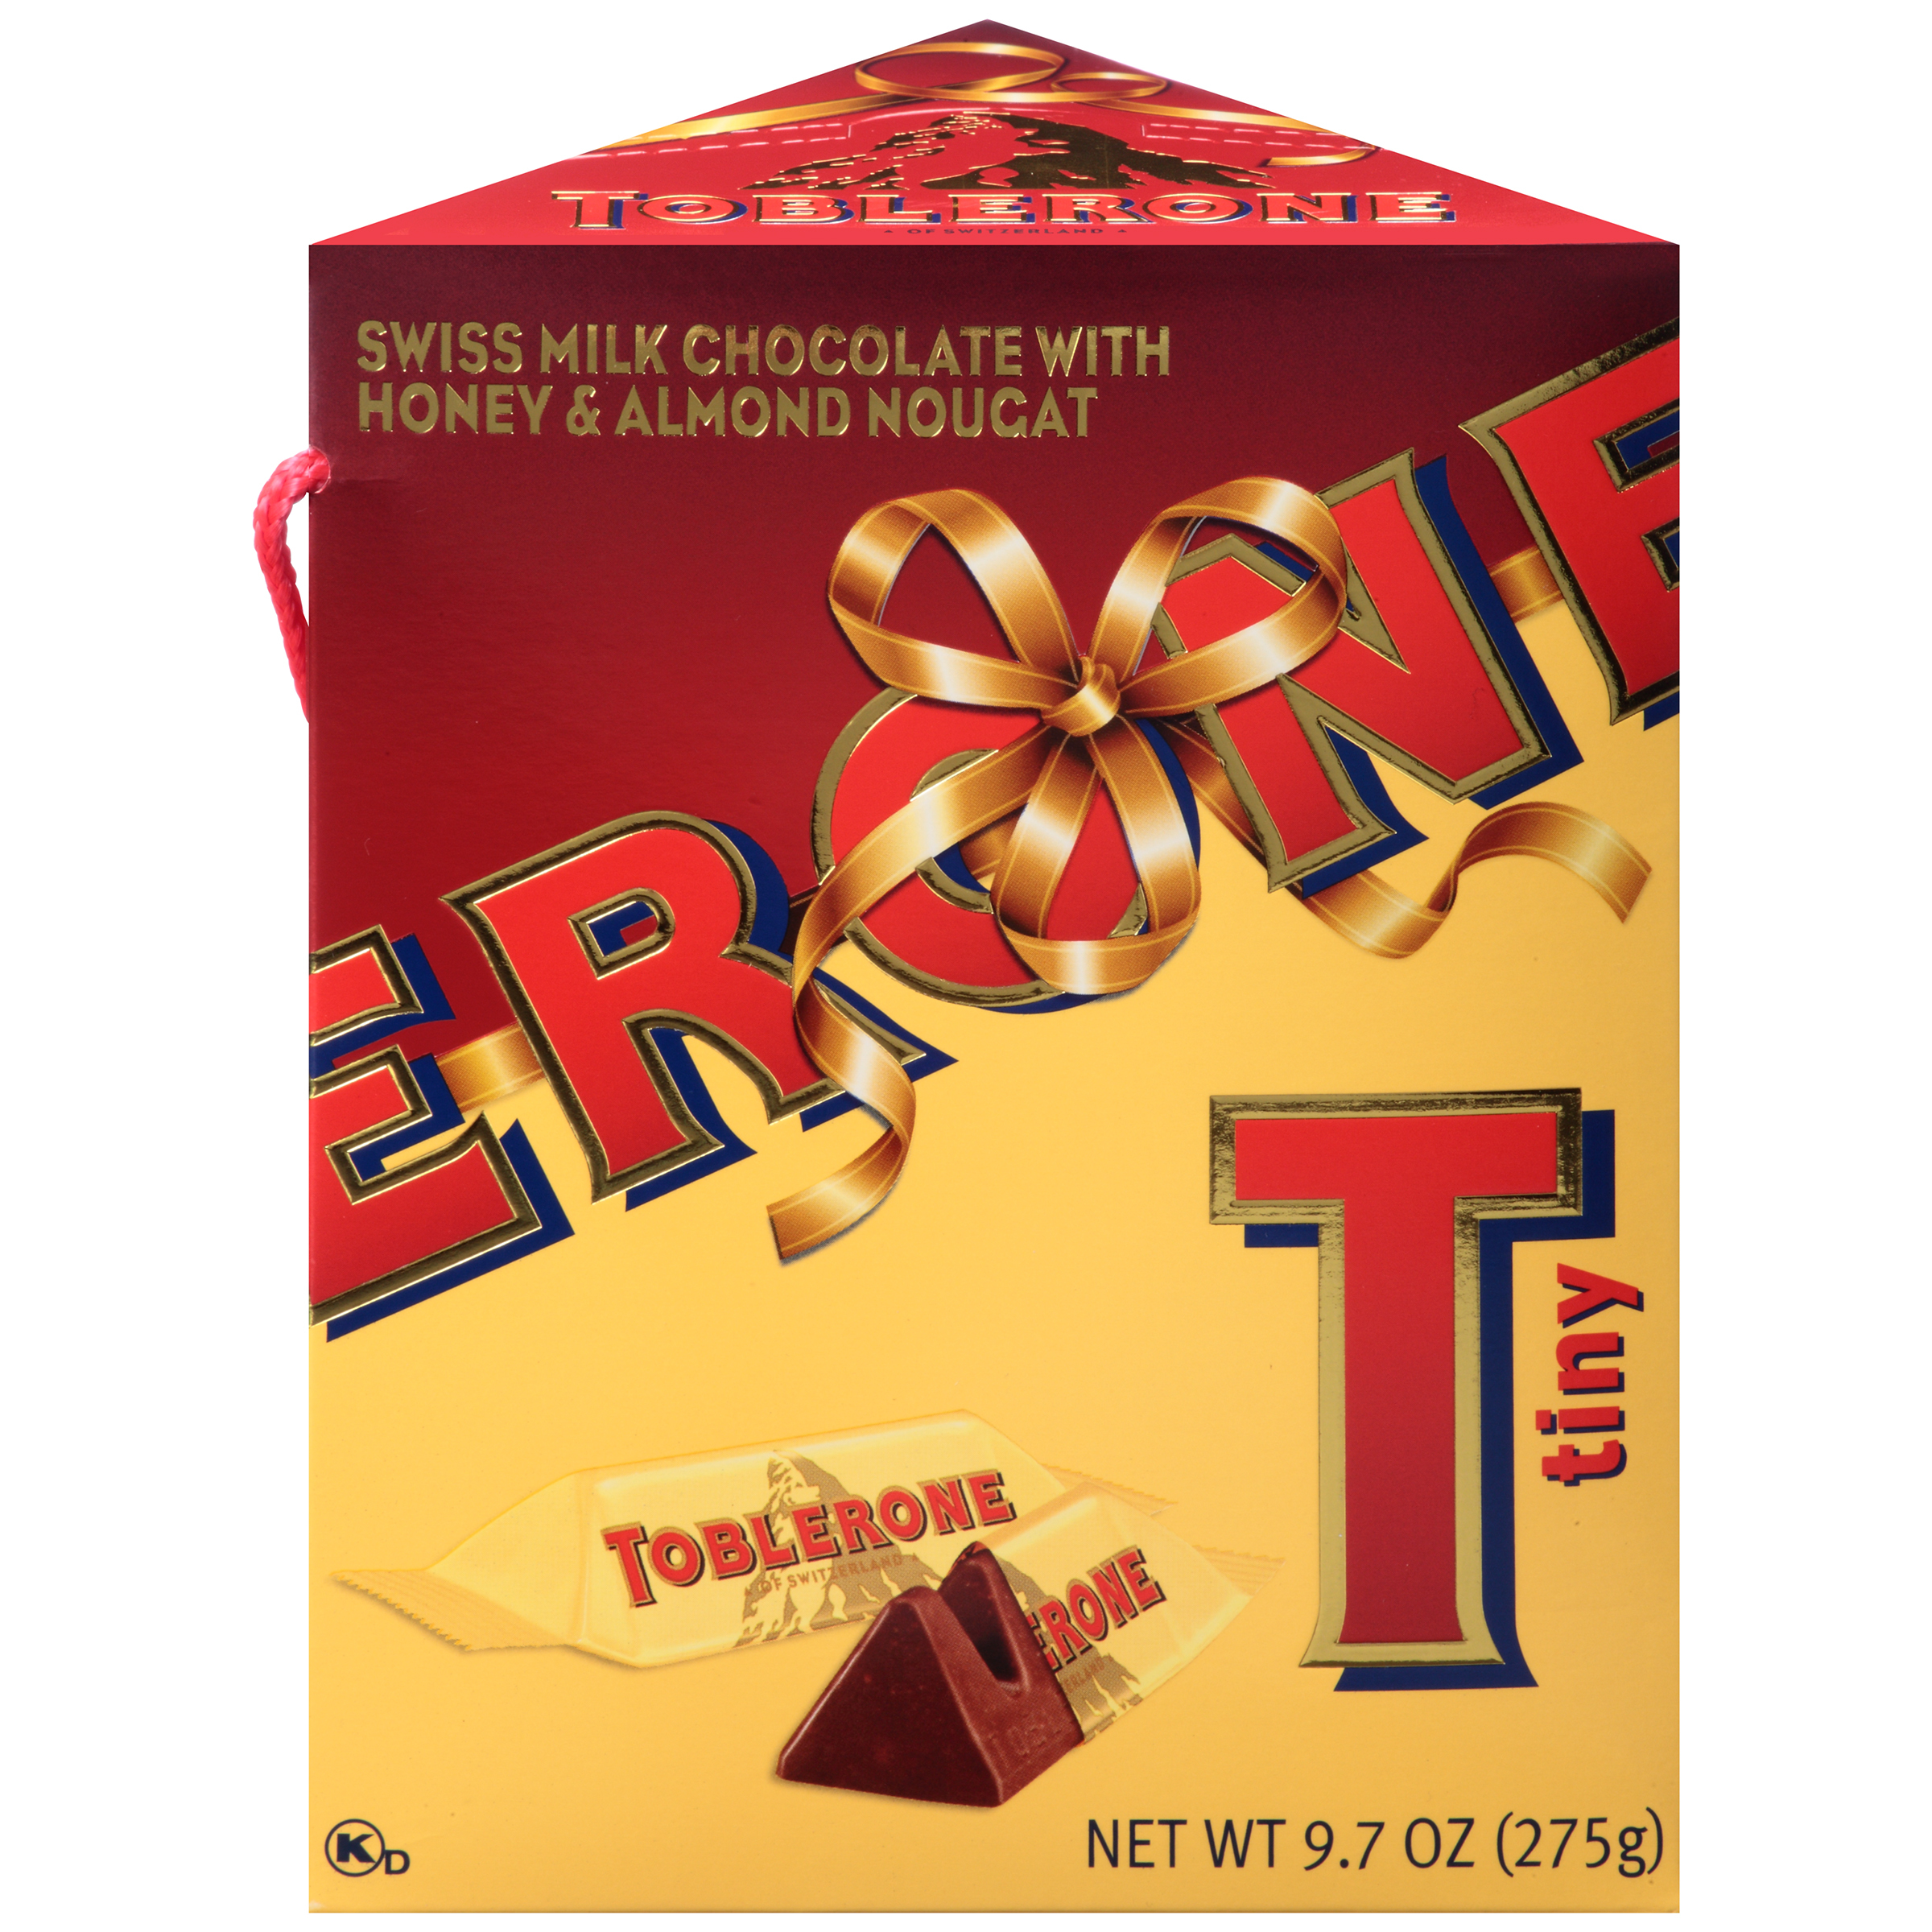 Toblerone Tiny Swiss Milk Chocolate Candy Bars with Honey and Almond Nougat, Holiday Chocolate Gift Box, 9.7 oz-0